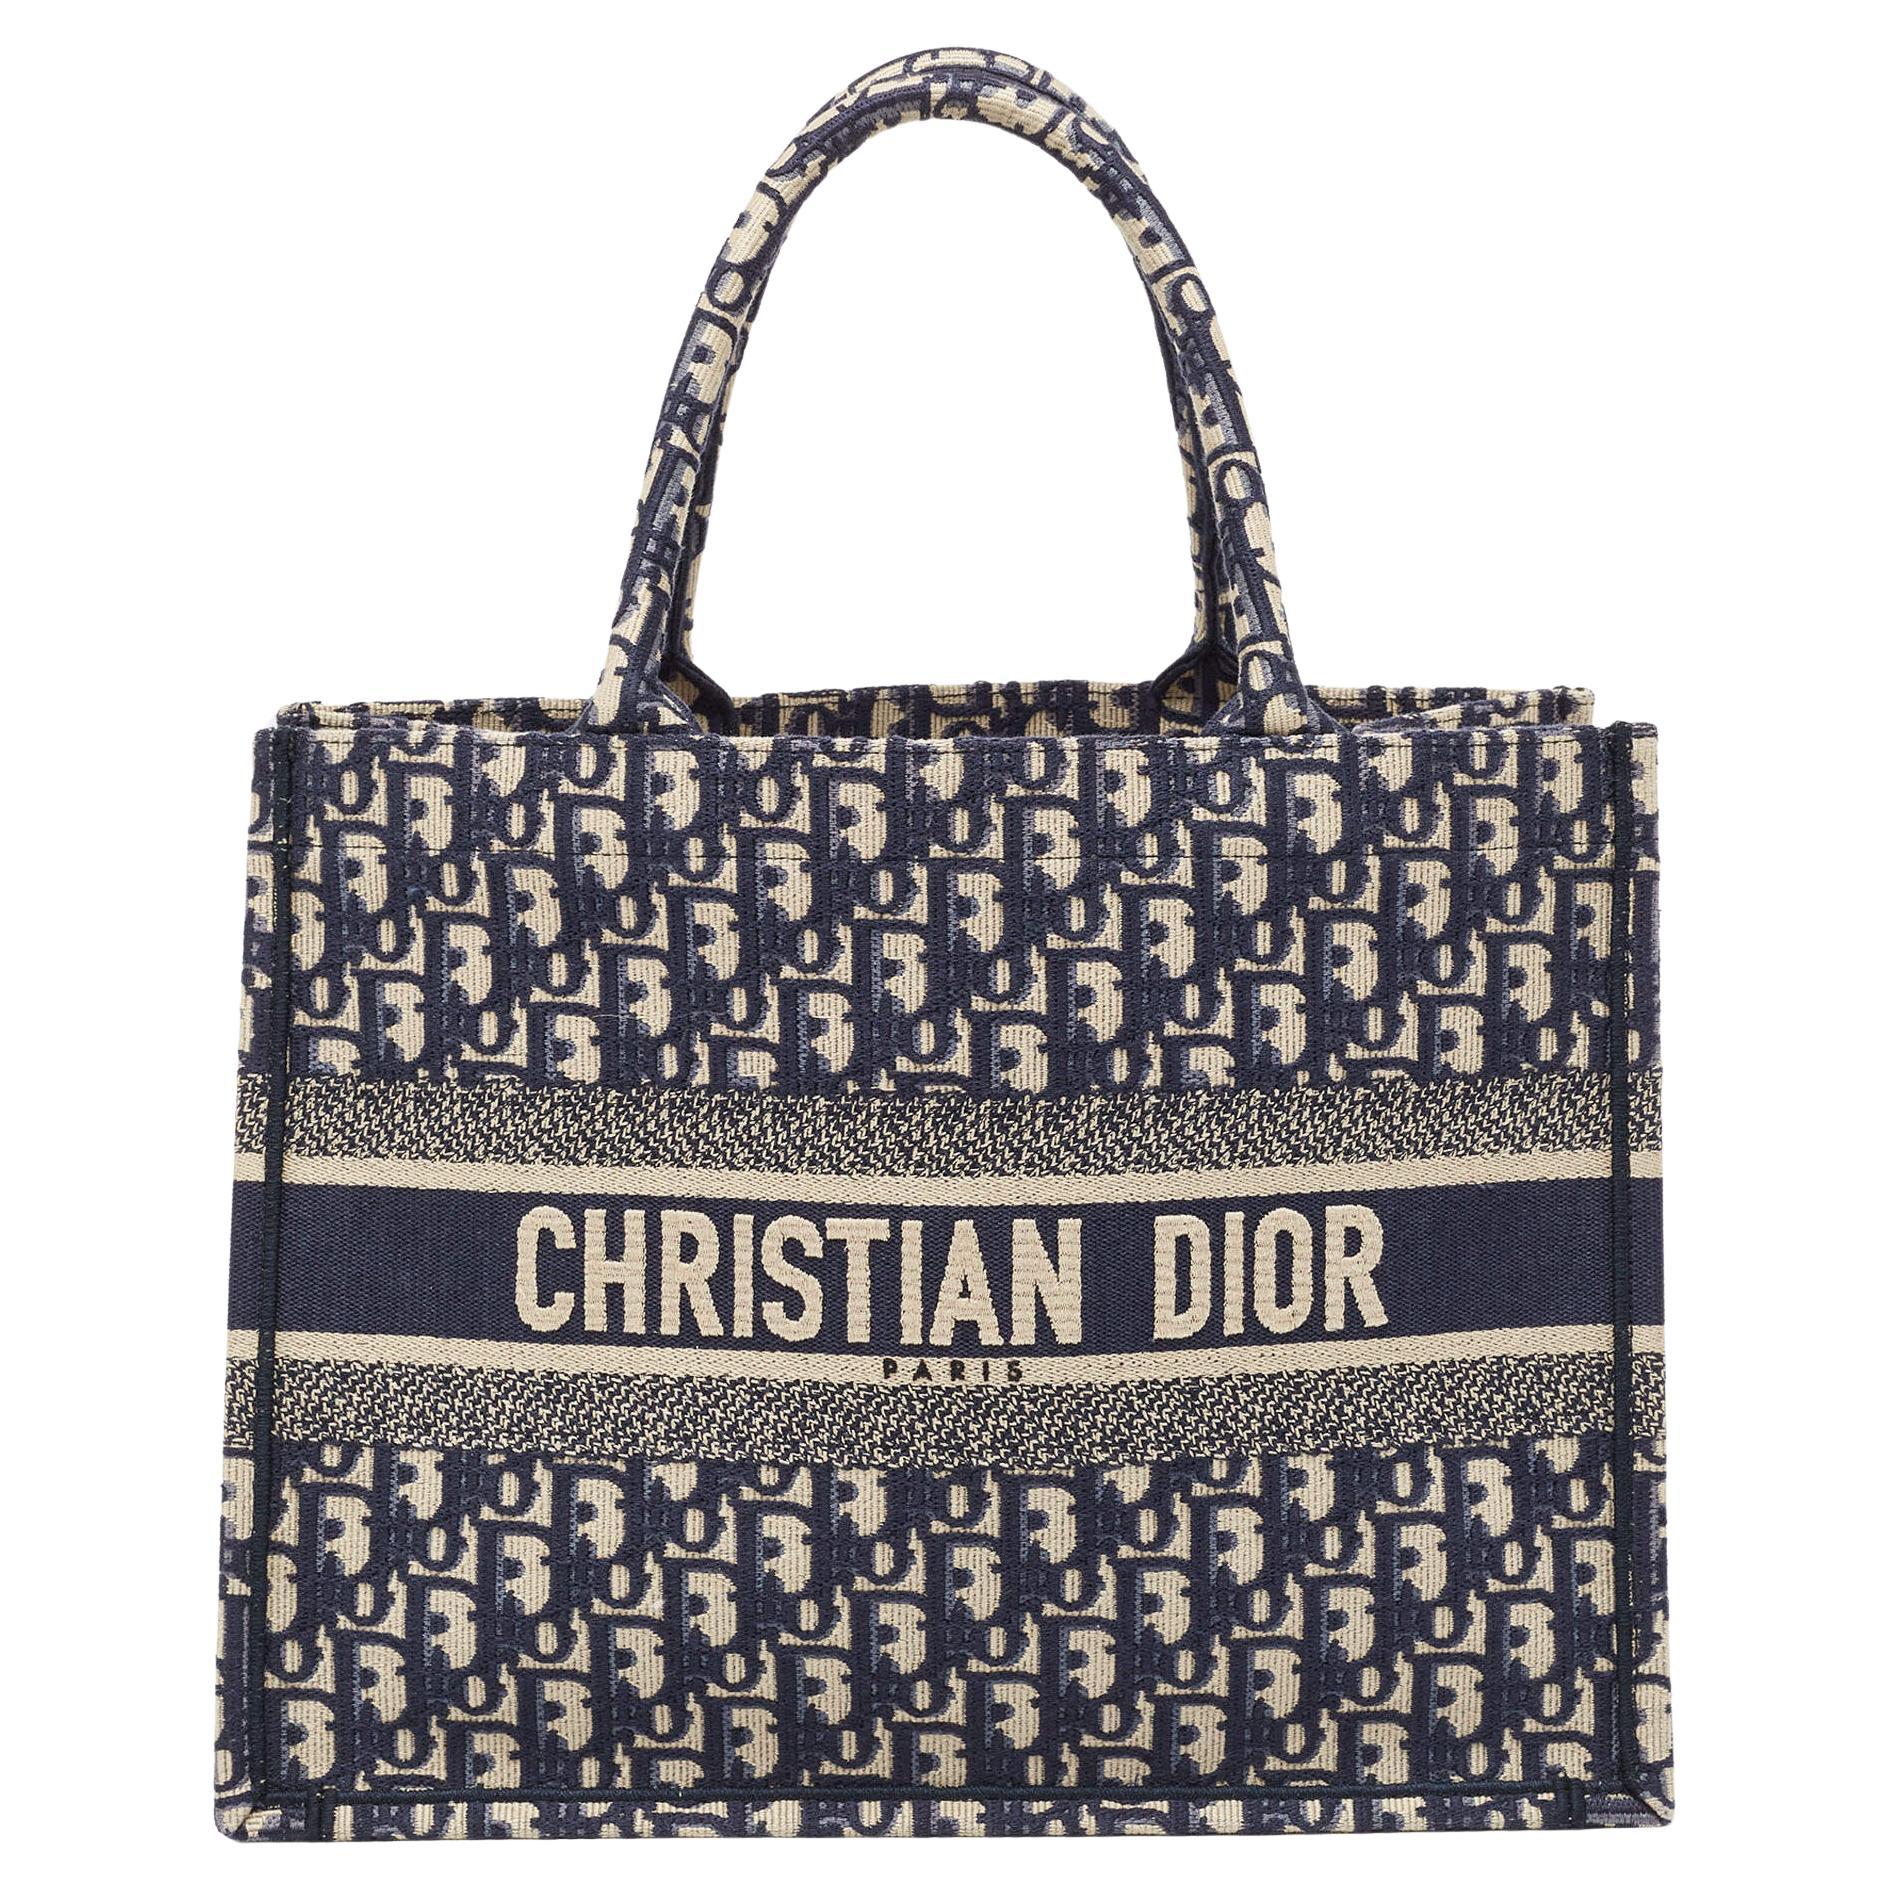 Designed by Maria Grazia Chiuri, the Dior Book Tote is a travel accessory for people with style. The bag here is crafted using canvas into a beautiful structure and covered in Oblique embroidery. Two handles, the 'Christian Dior' signature, and a